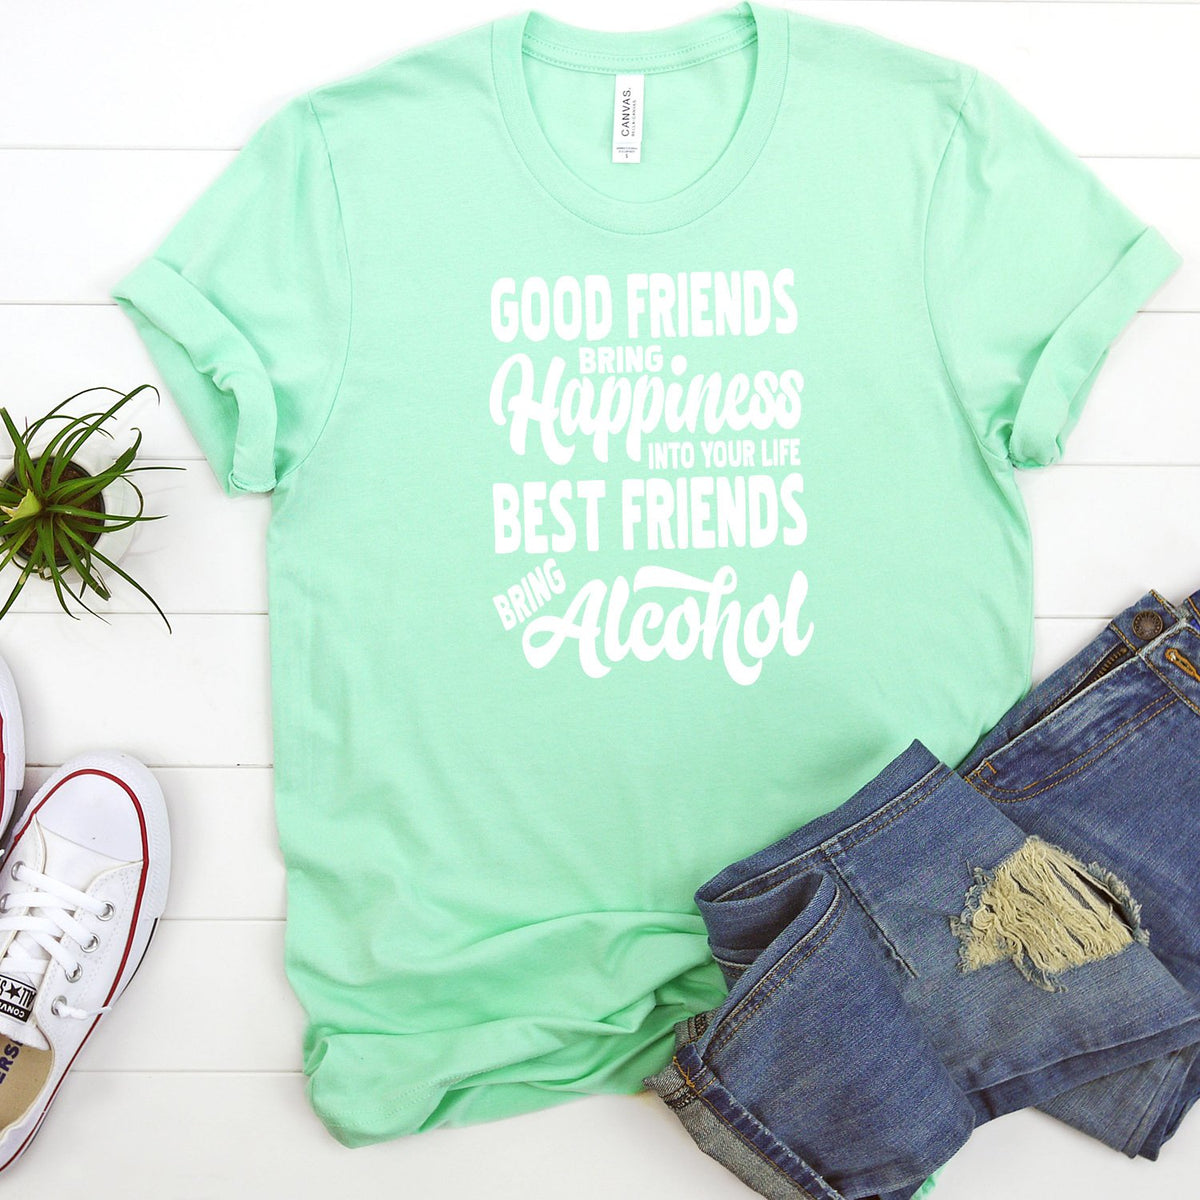 Good Friends Bring Happiness into Your Life Best Friends Bring Alcohol - Short Sleeve Tee Shirt